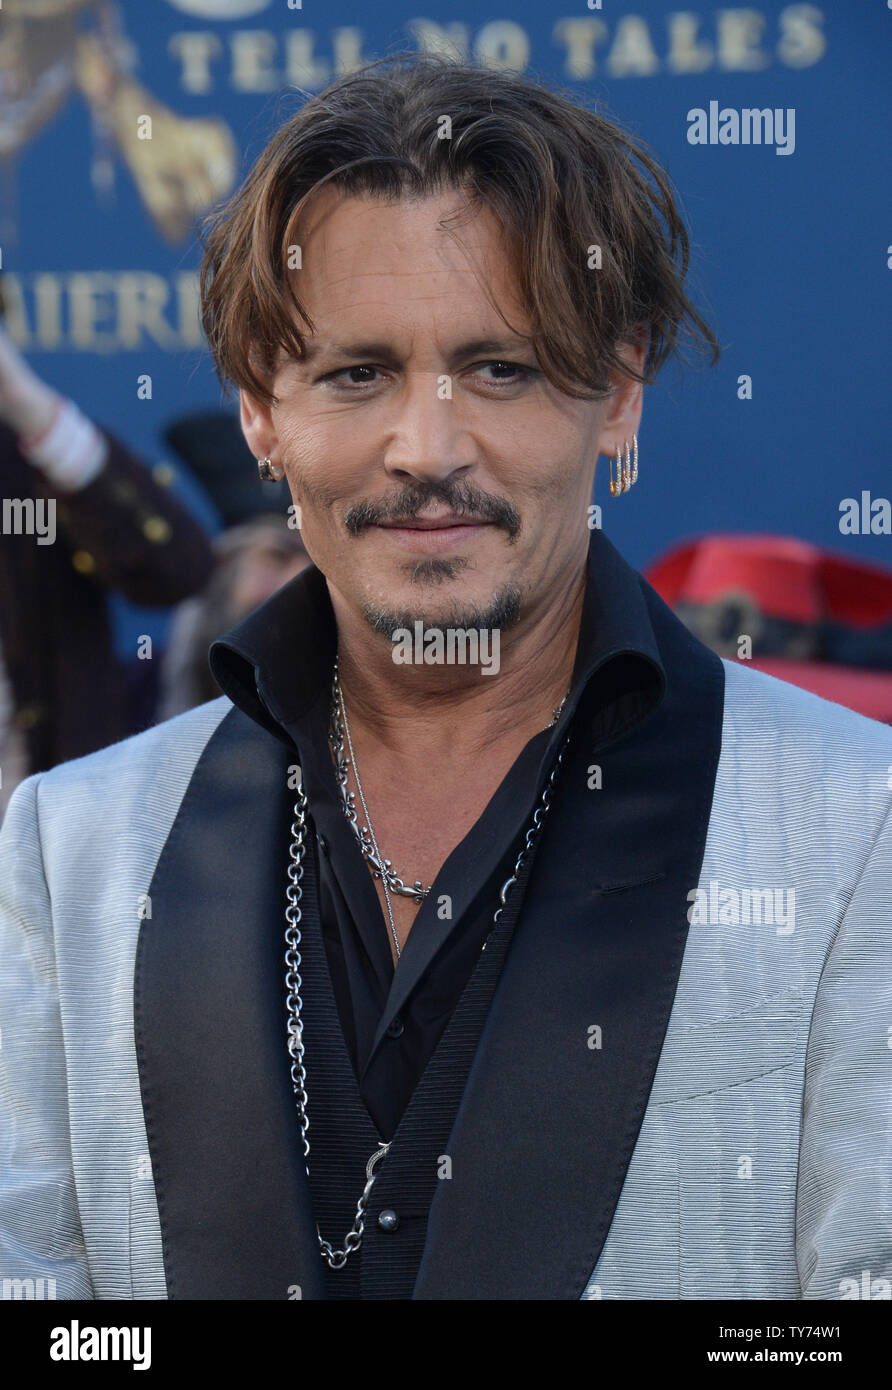 Cast member Johnny Depp attends the premiere of the premiere of the ...